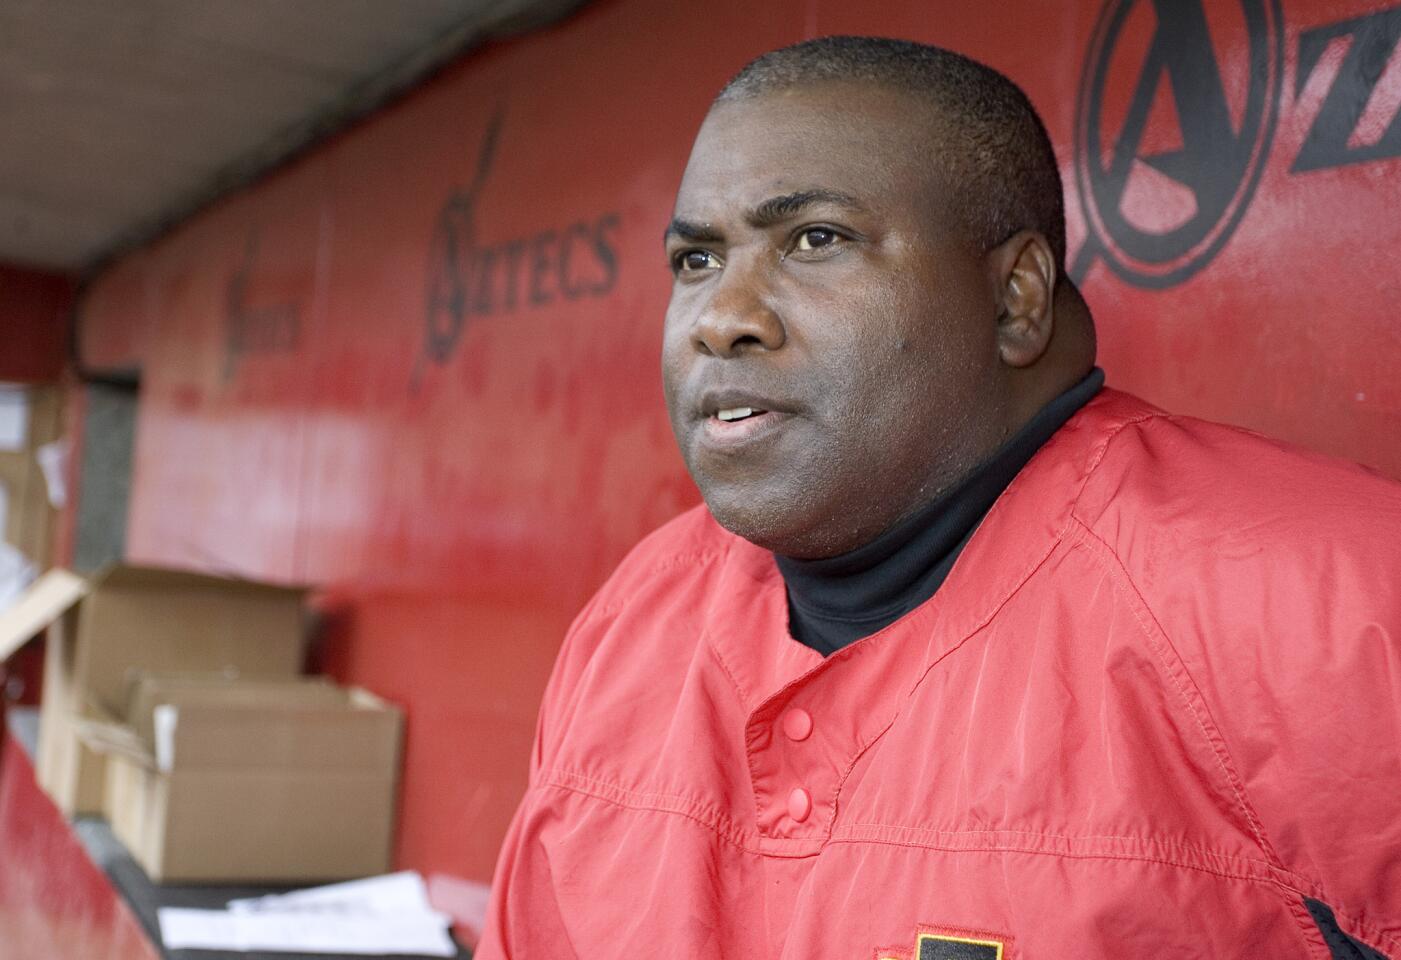 Tony Gwynn, shown in 2006, died in June 2014 from complications related to cancer of the salivary gland. He blamed chewing tobacco for his disease.